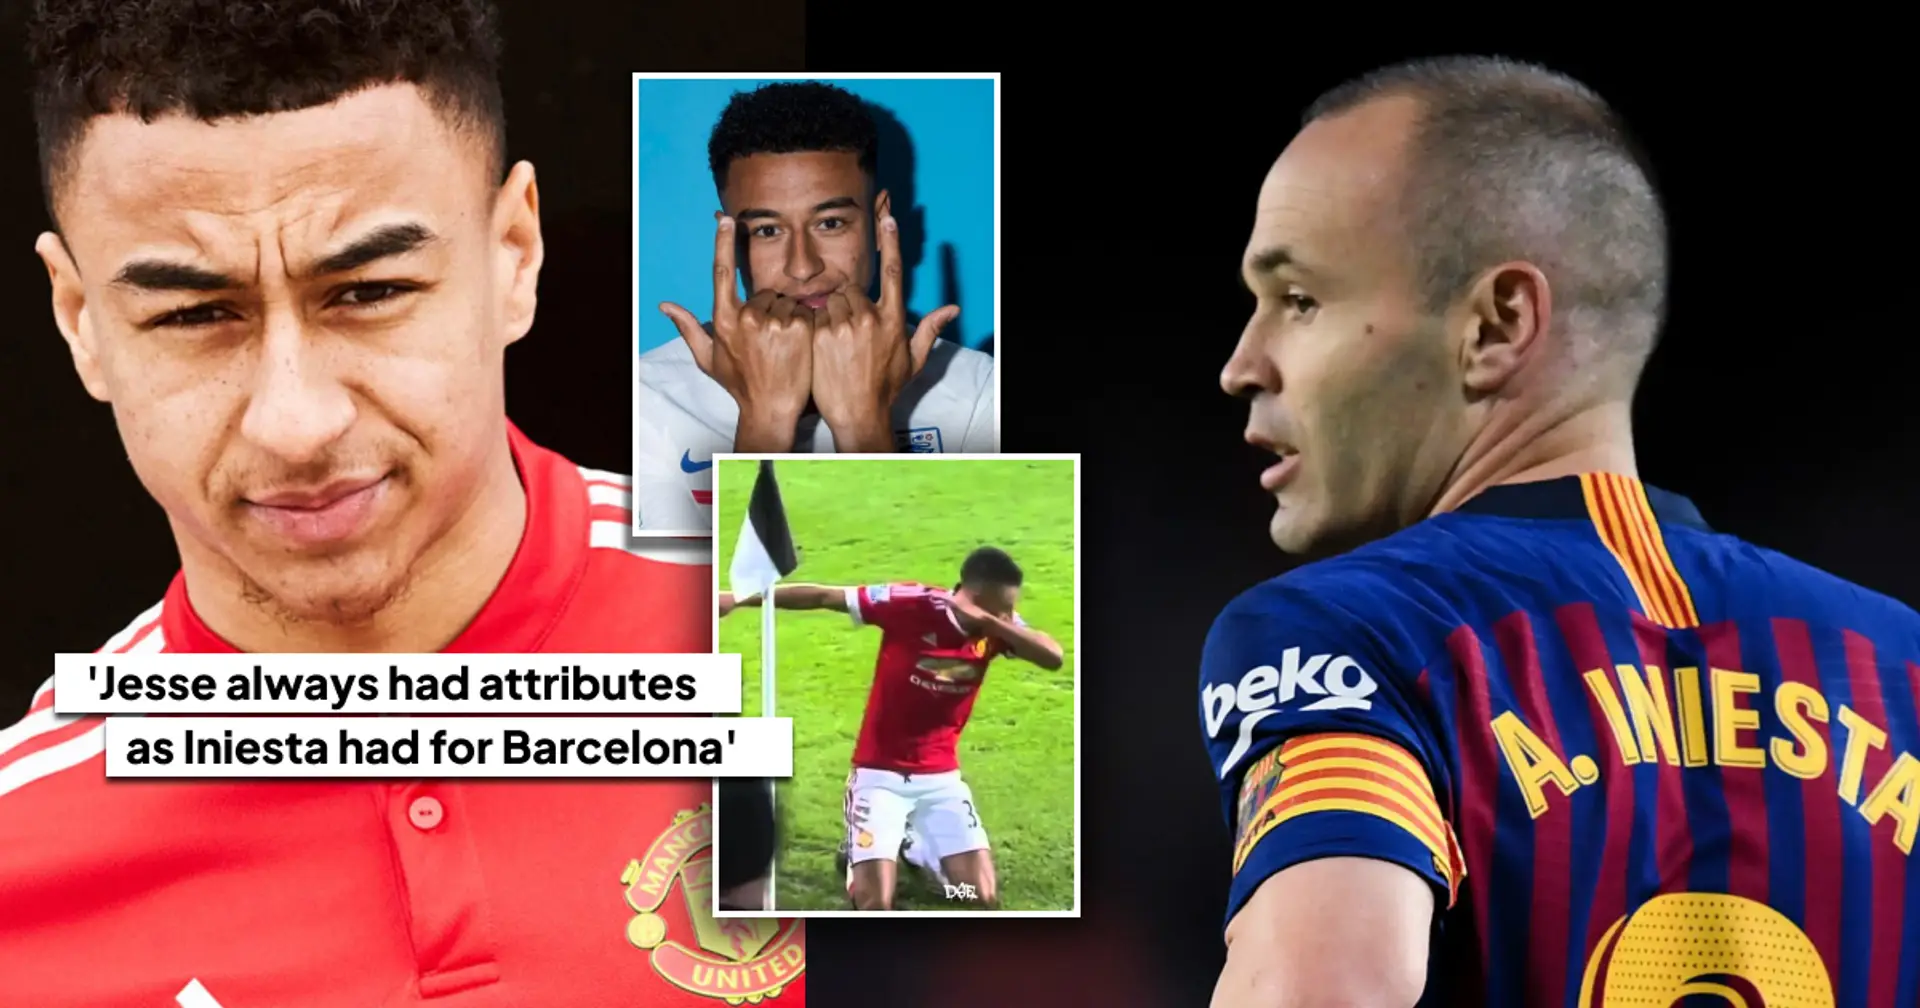 Jesse Lingard 'offers' himself to Barcelona - he was once compared to Iniesta